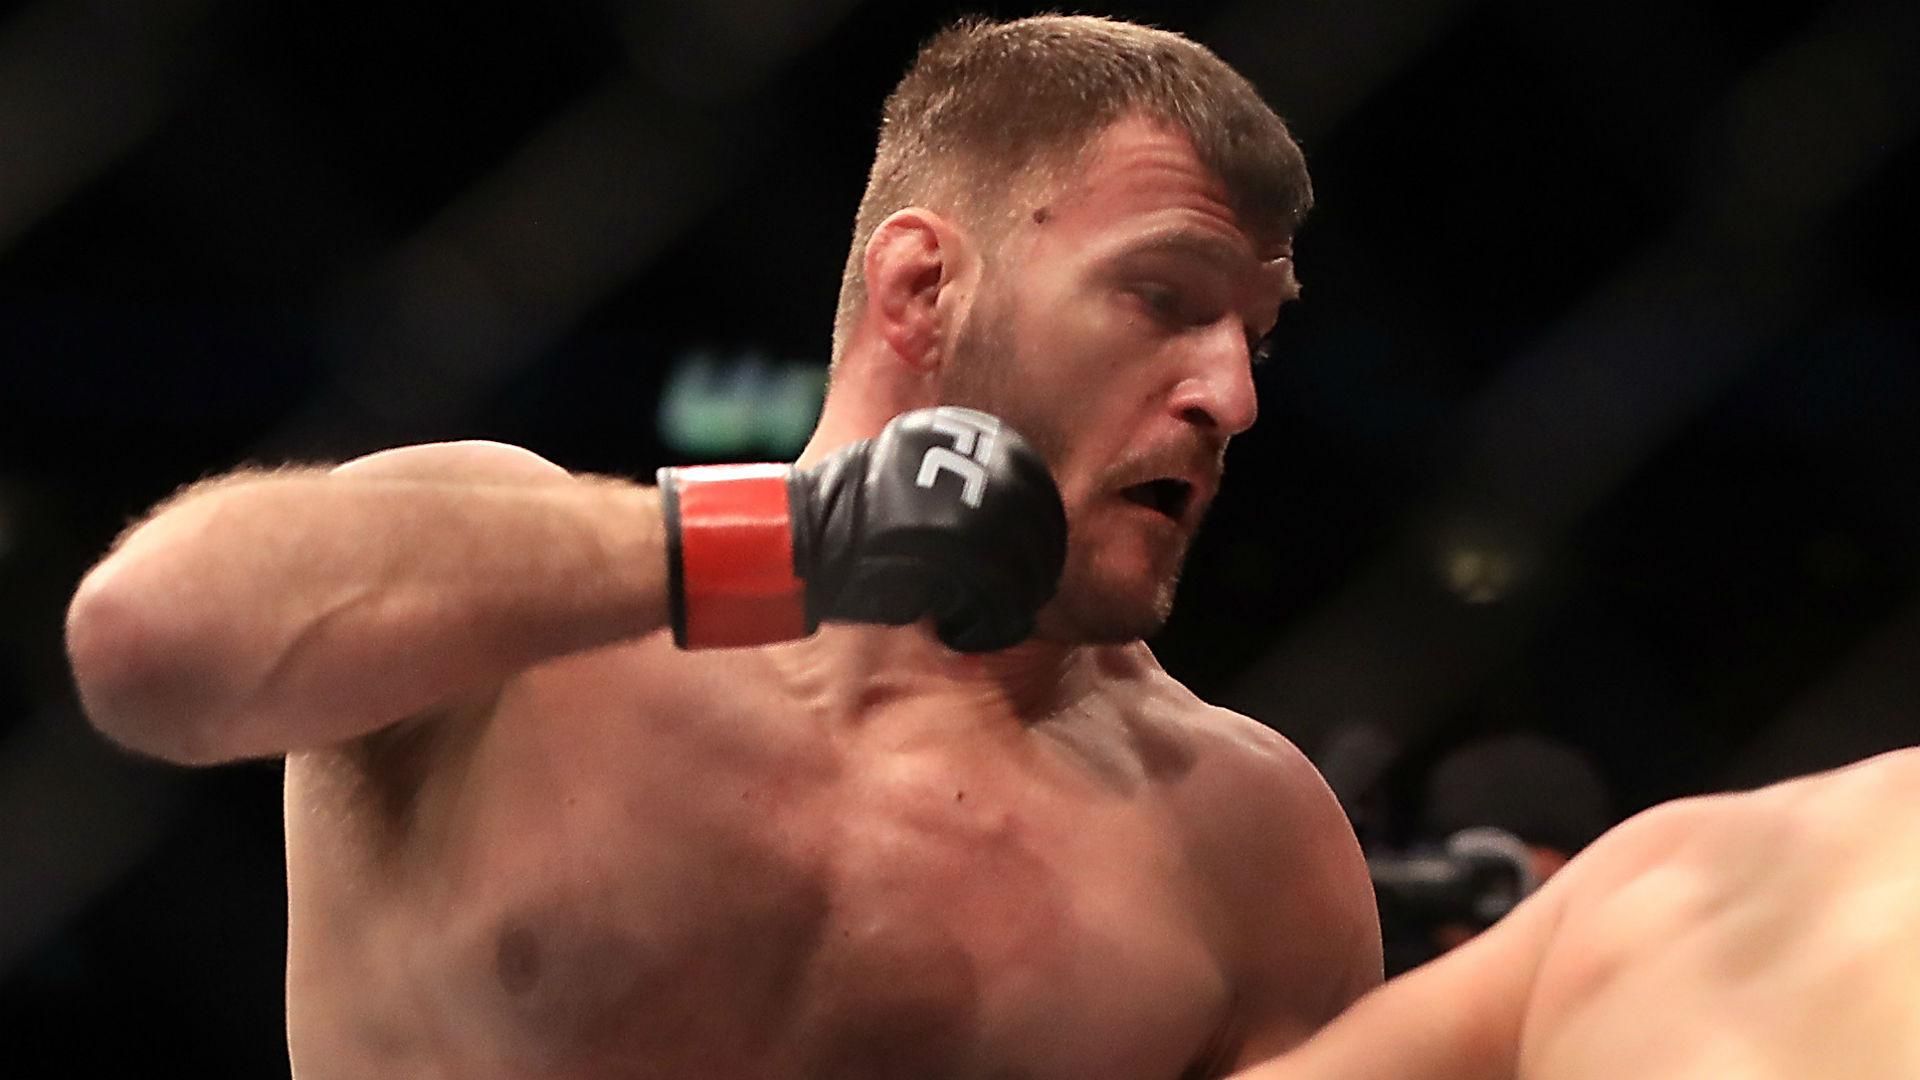 &quot;I'll be your punching bag&quot; - Strickland offers Miocic help in training camp against Jones